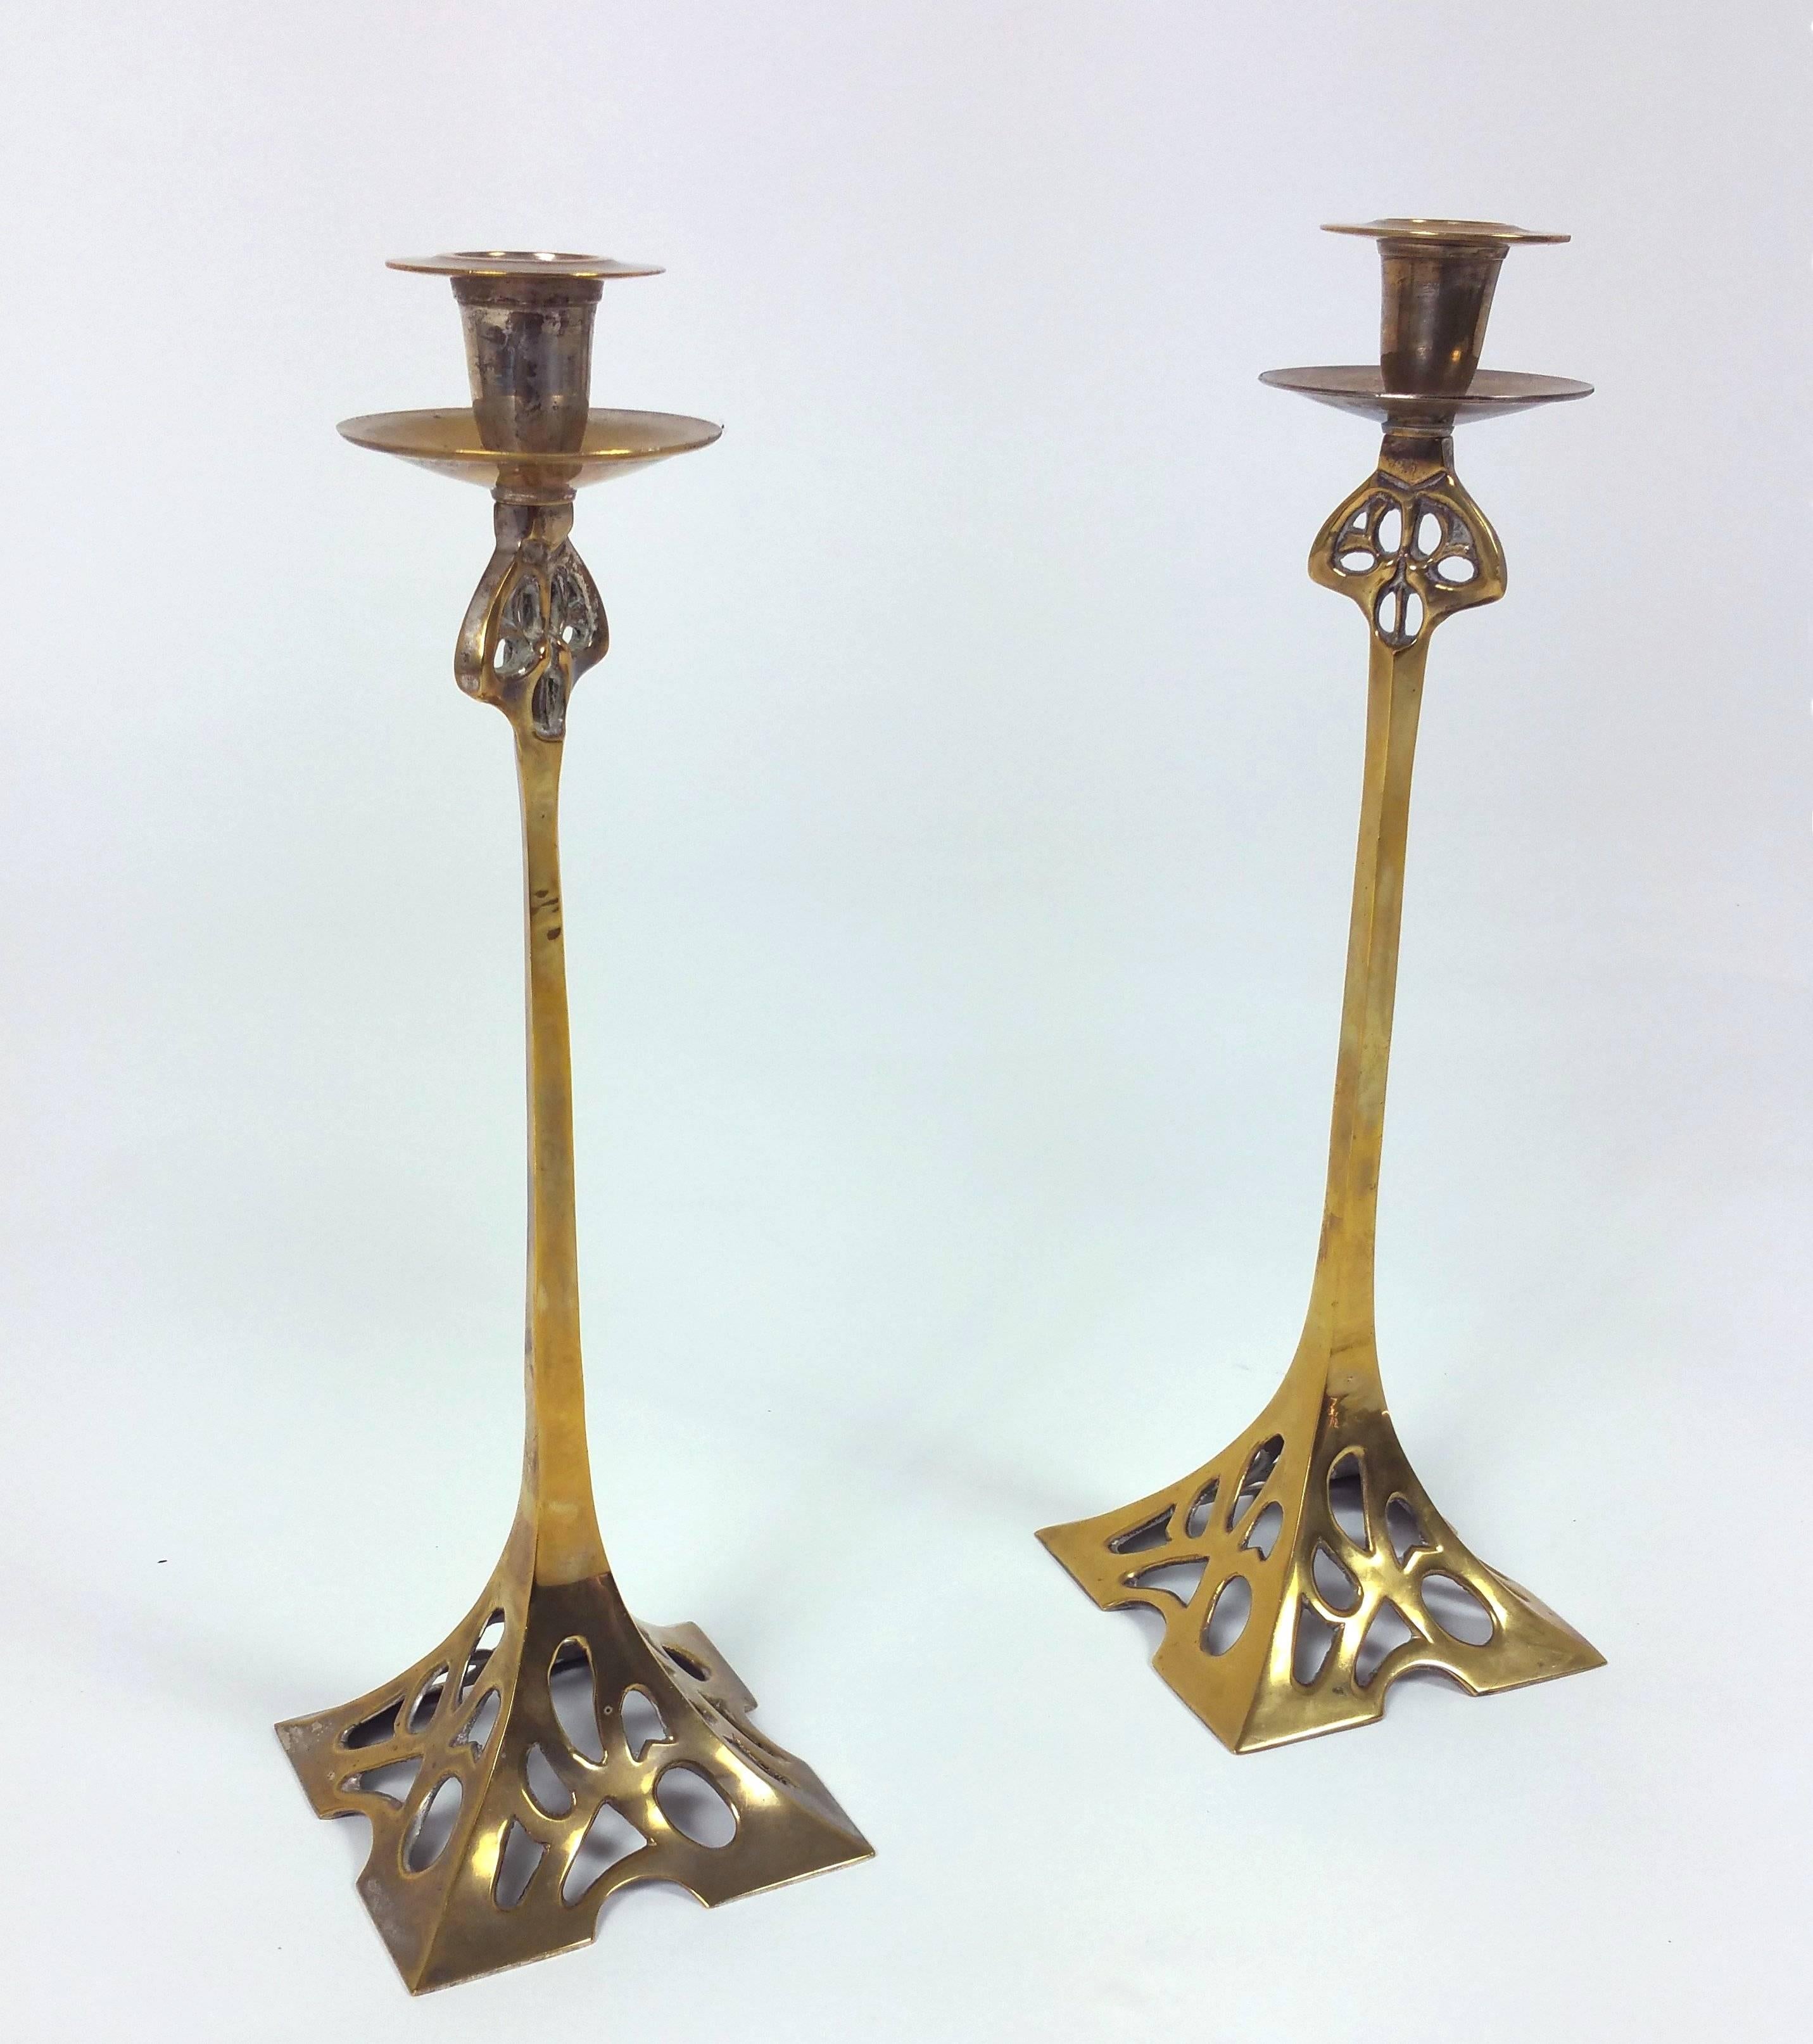 This attractive pair of Art Nouveau 19th century brass candlesticks features a beautifully shaped square base with pierced design detail. Each candlestick measures 4 ½ in – 11.4 cm wide and deep, with a height of 14 ½ in – 36.8 cm. These